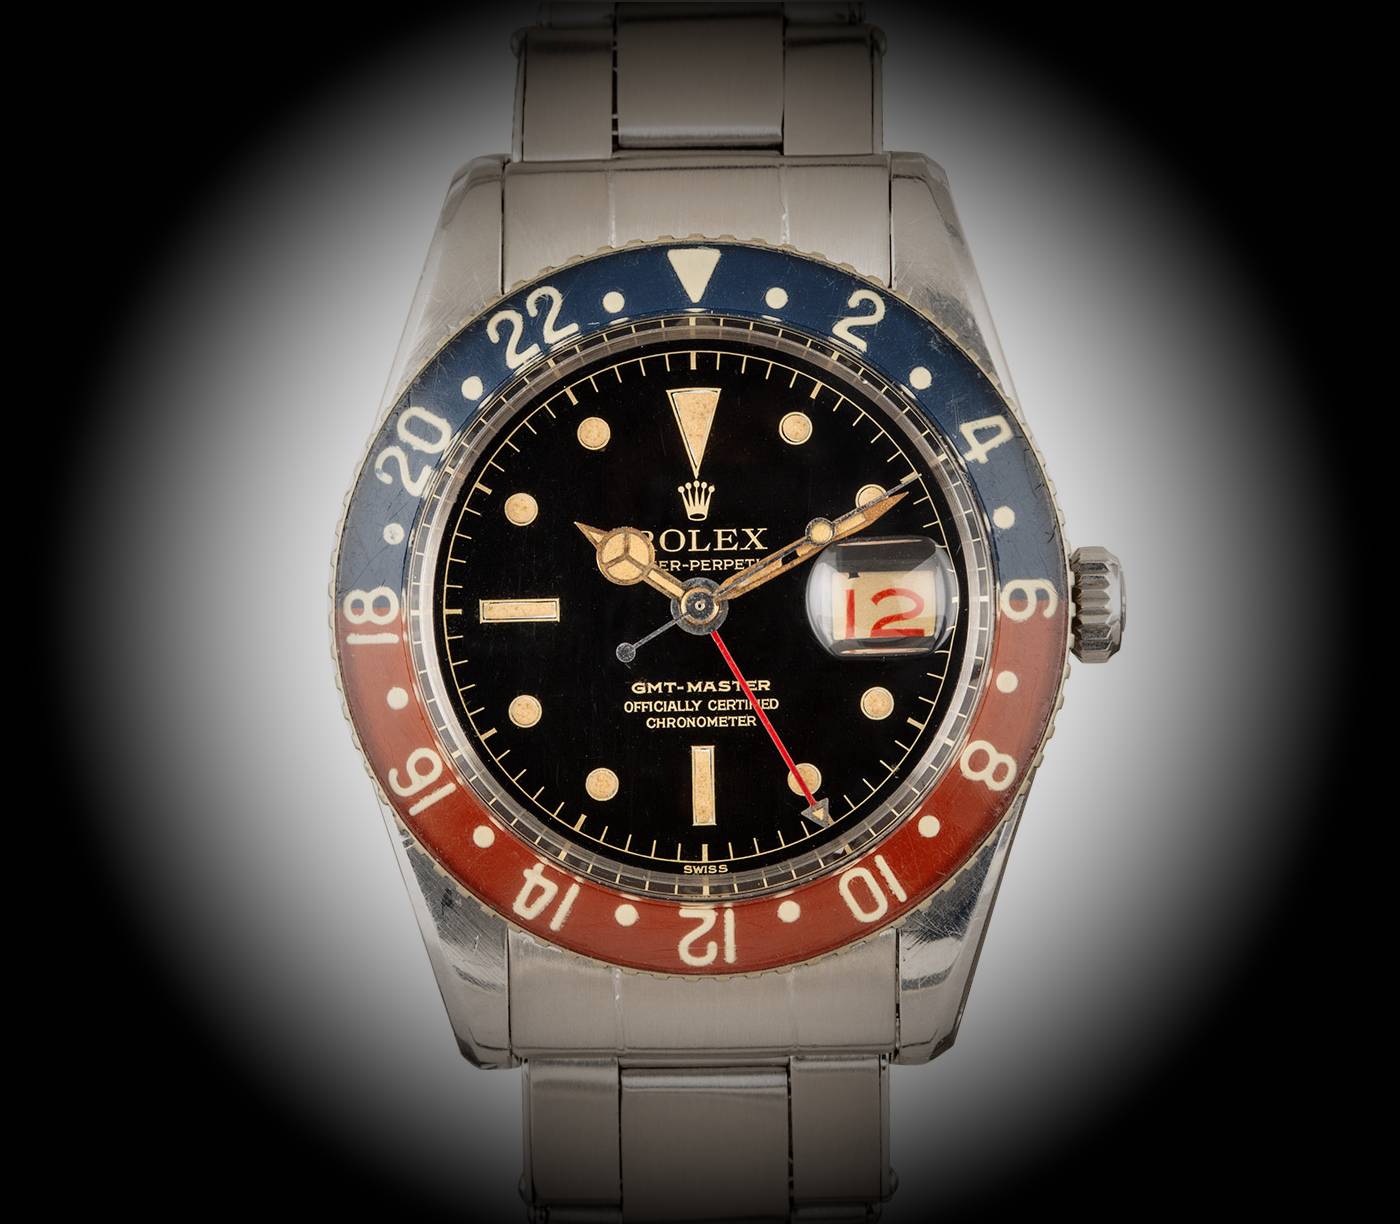 Iconic_watches_of_Hollywood_Rolex_gmt_master_pussy_galore_ref._6542-europa_star_watch_magazine_2020